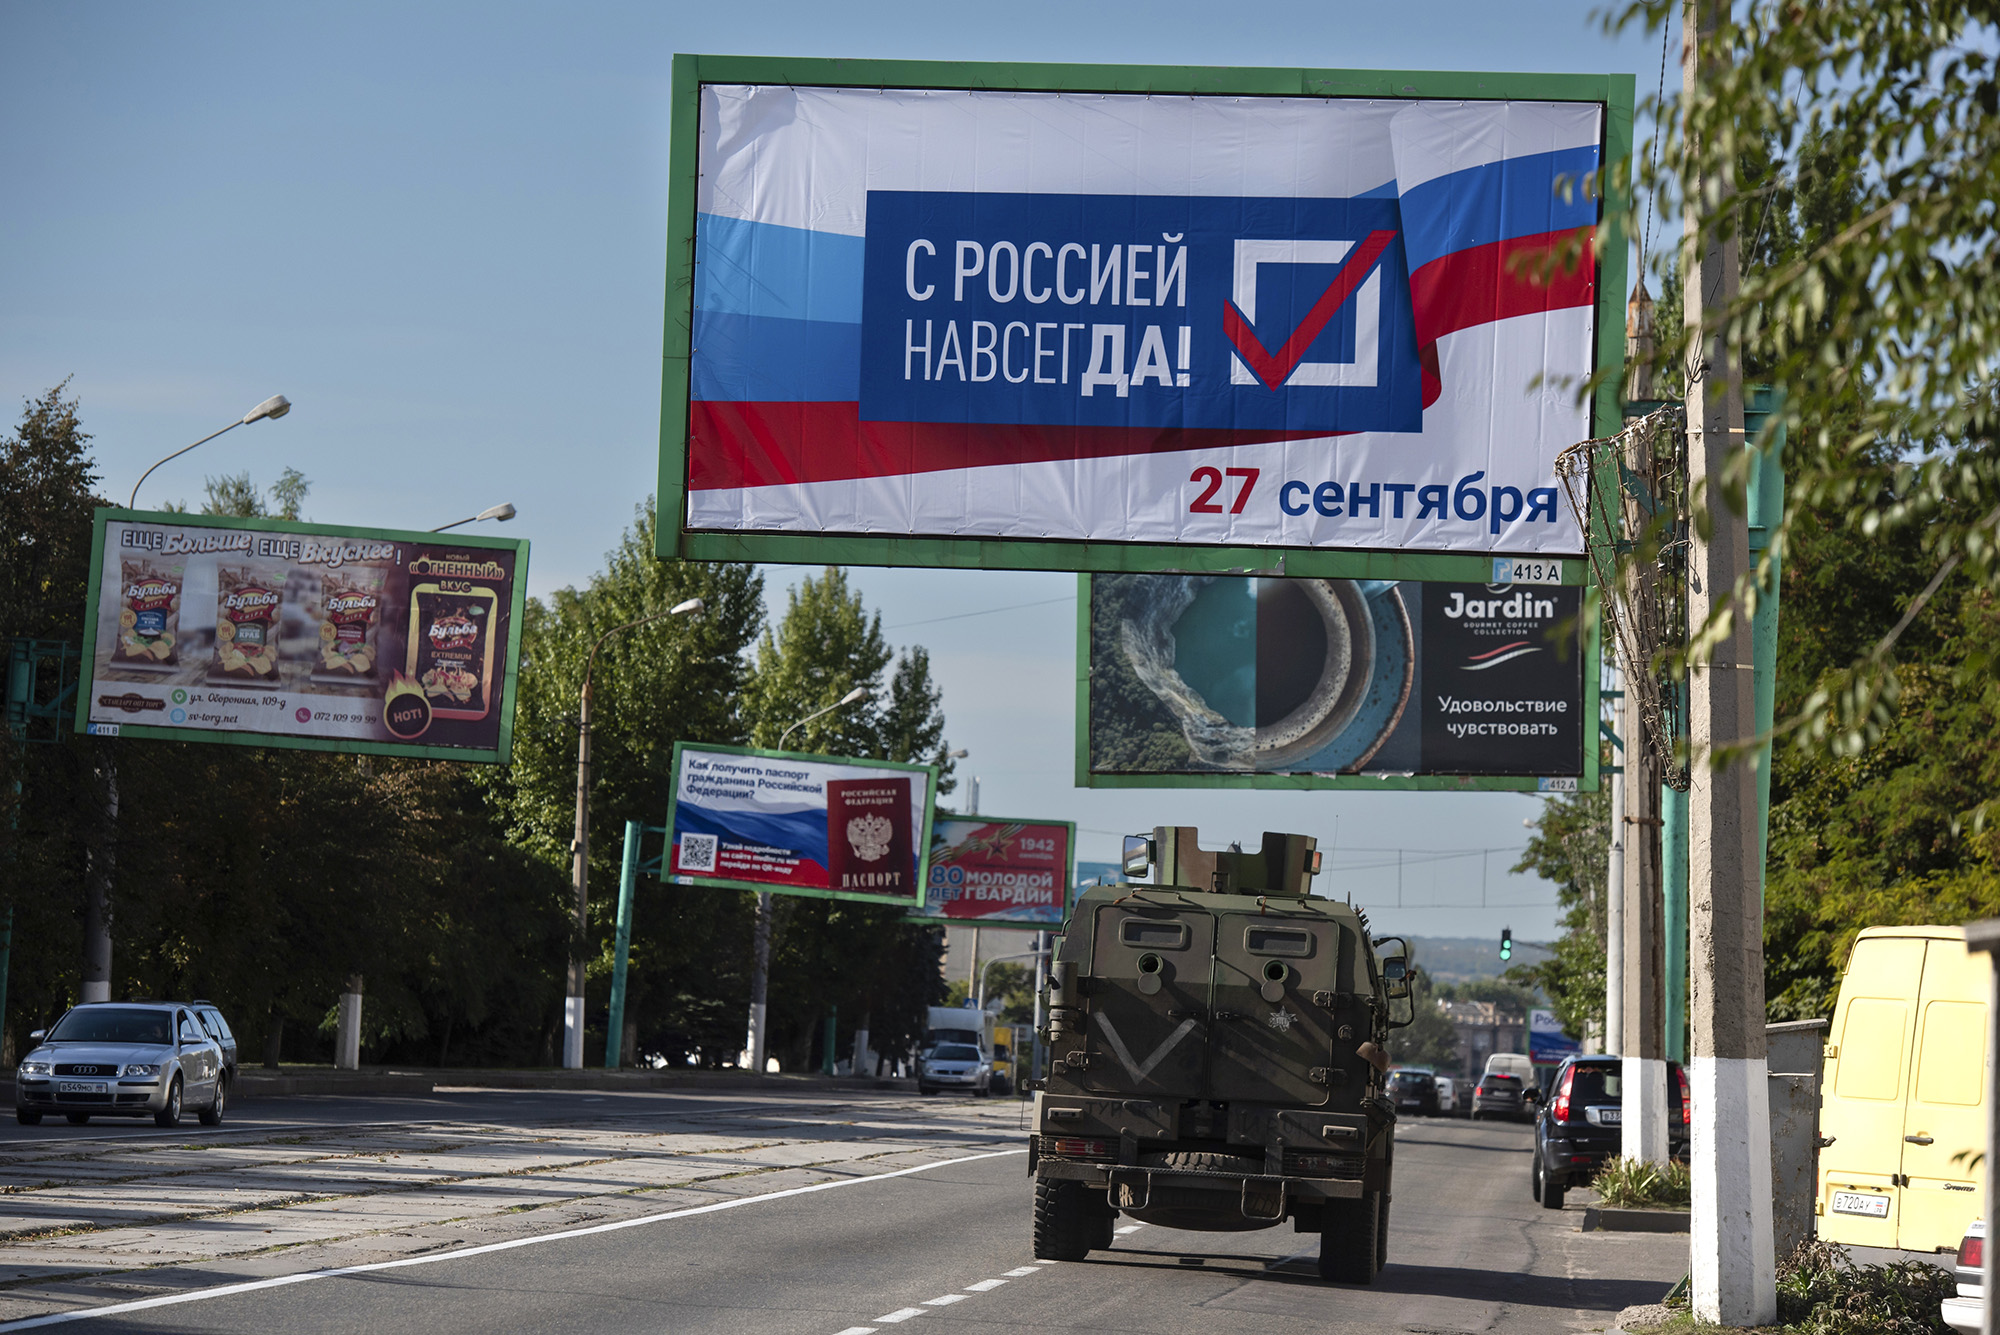 A military vehicle drives along a street with a billboard reading "With Russia forever, September 27" ahead of a referendum in Luhansk, eastern Ukraine, on 22 September.